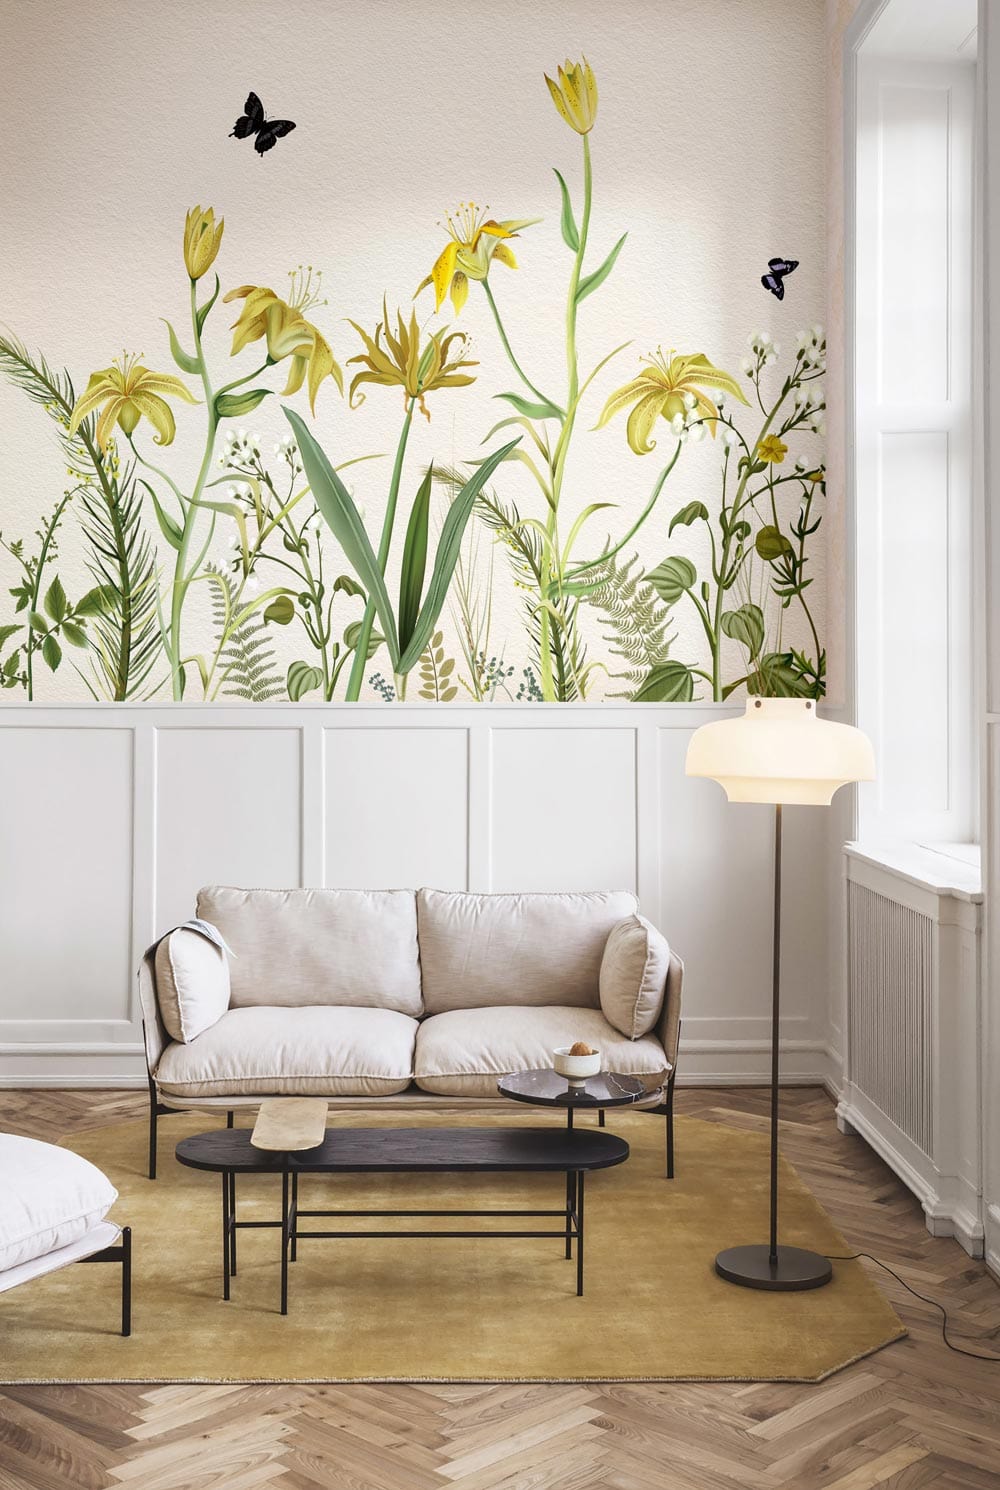 wall murals for the living room with yellow flowers and black butterflies